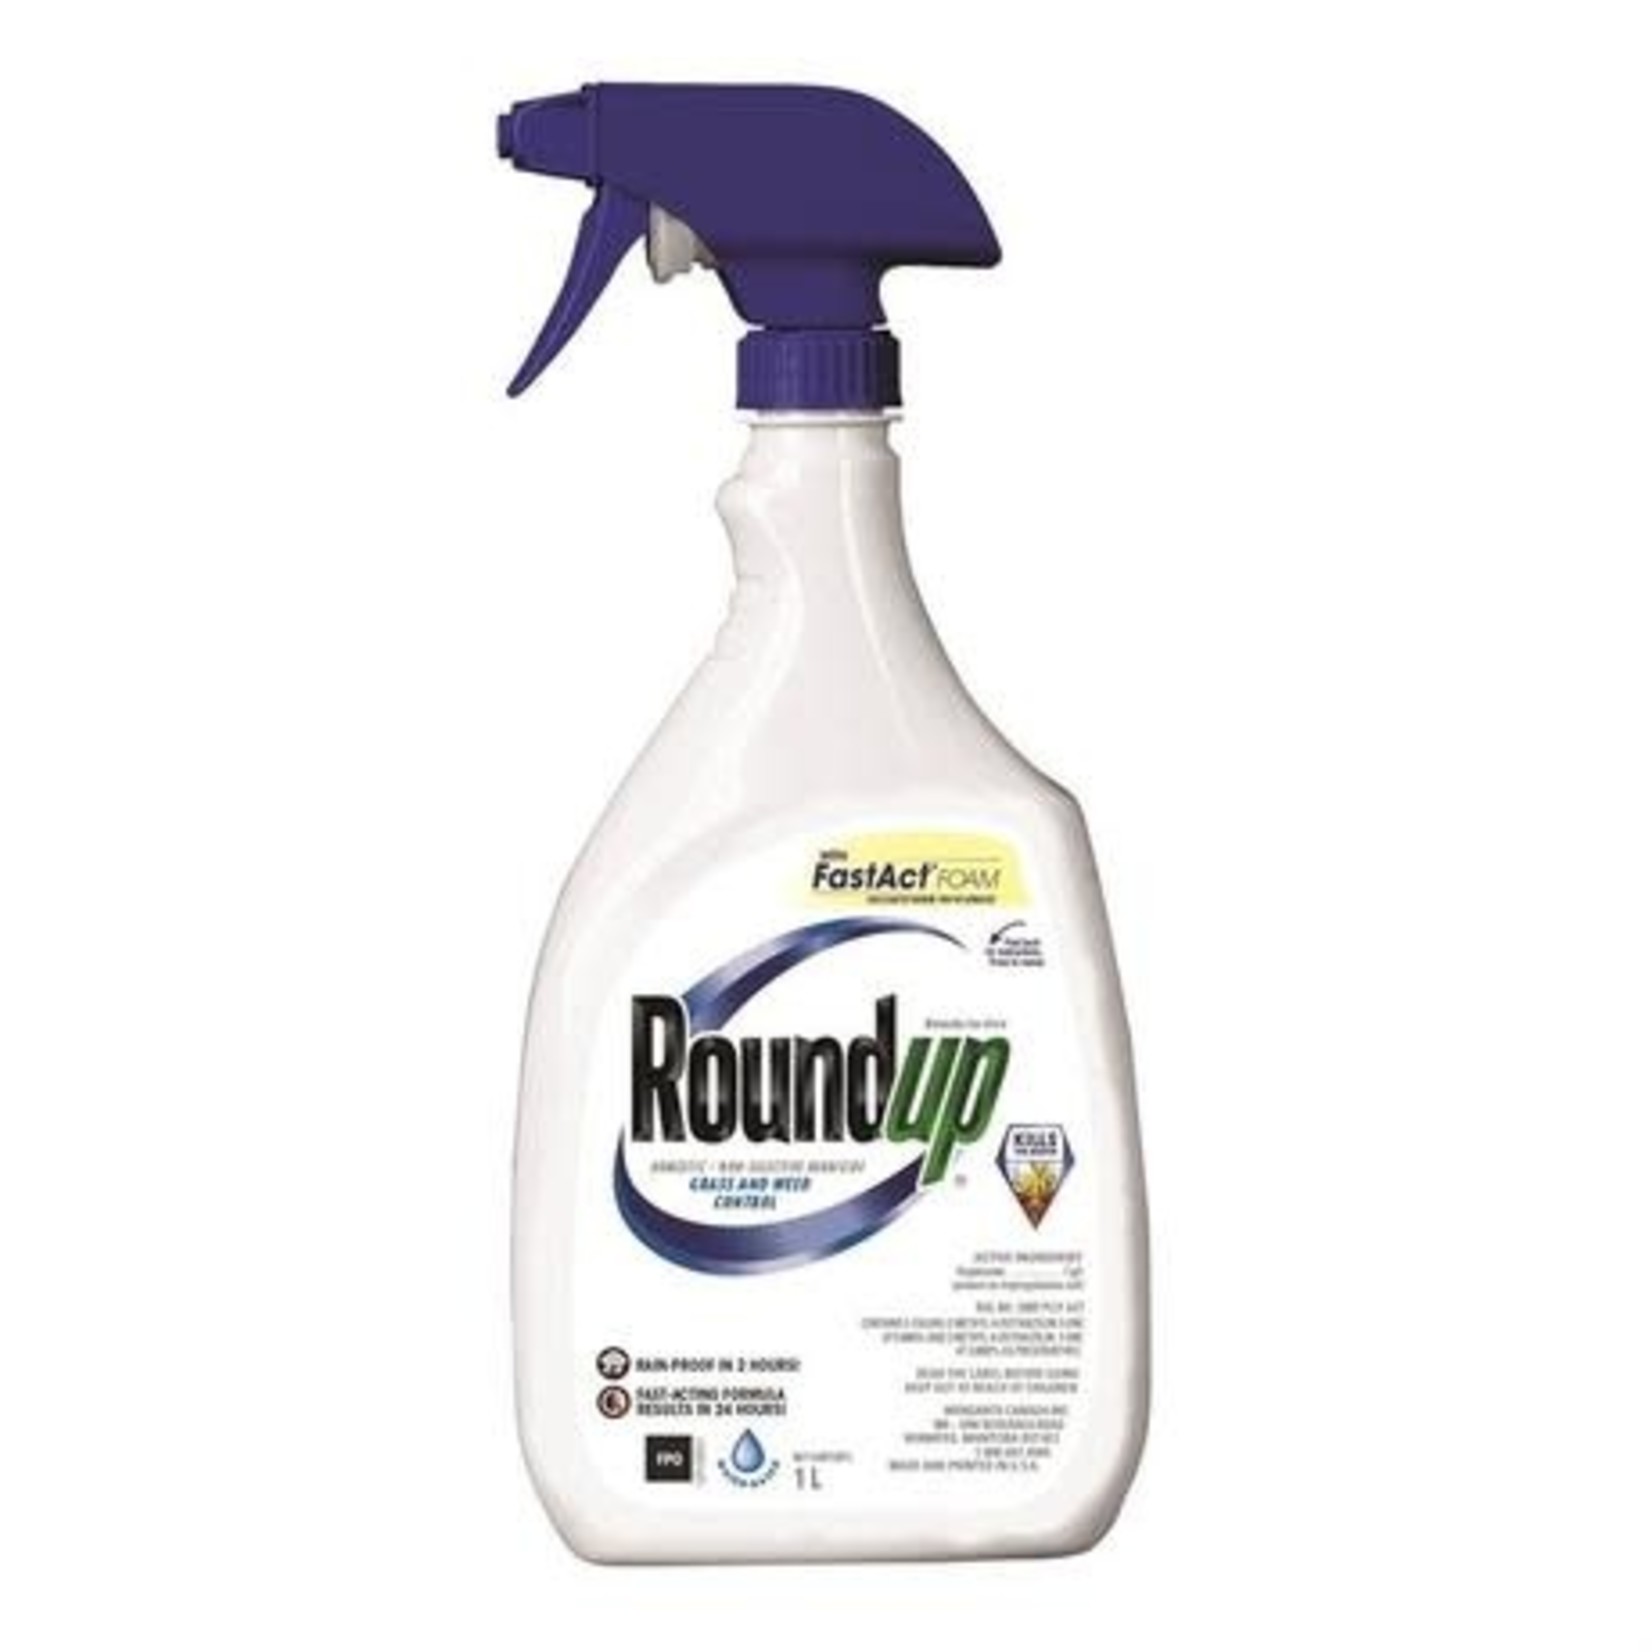 Roundup Roundup Ready-To-Use Non-Selective Herbicide with FastAct Foam - 1L - Case